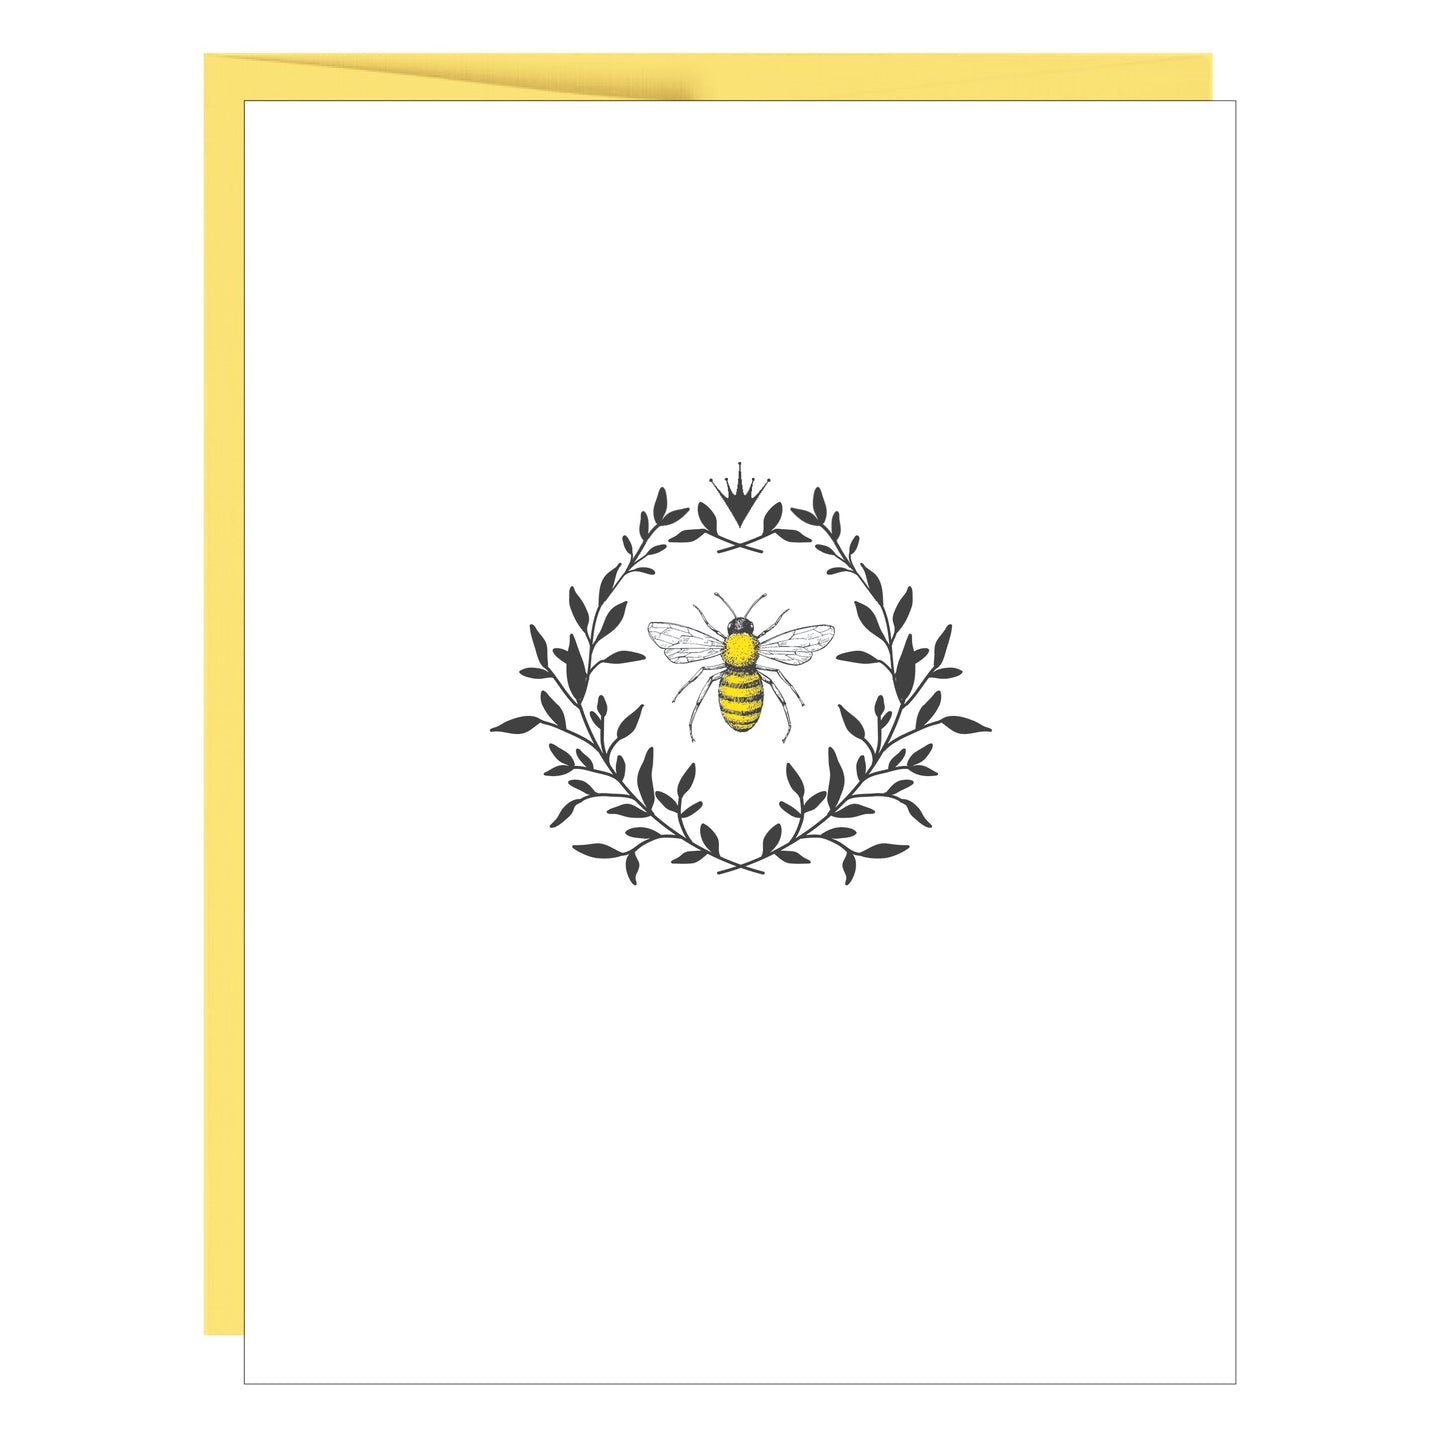 Queen Bee Letterpress Greeting Card - 5 Pack